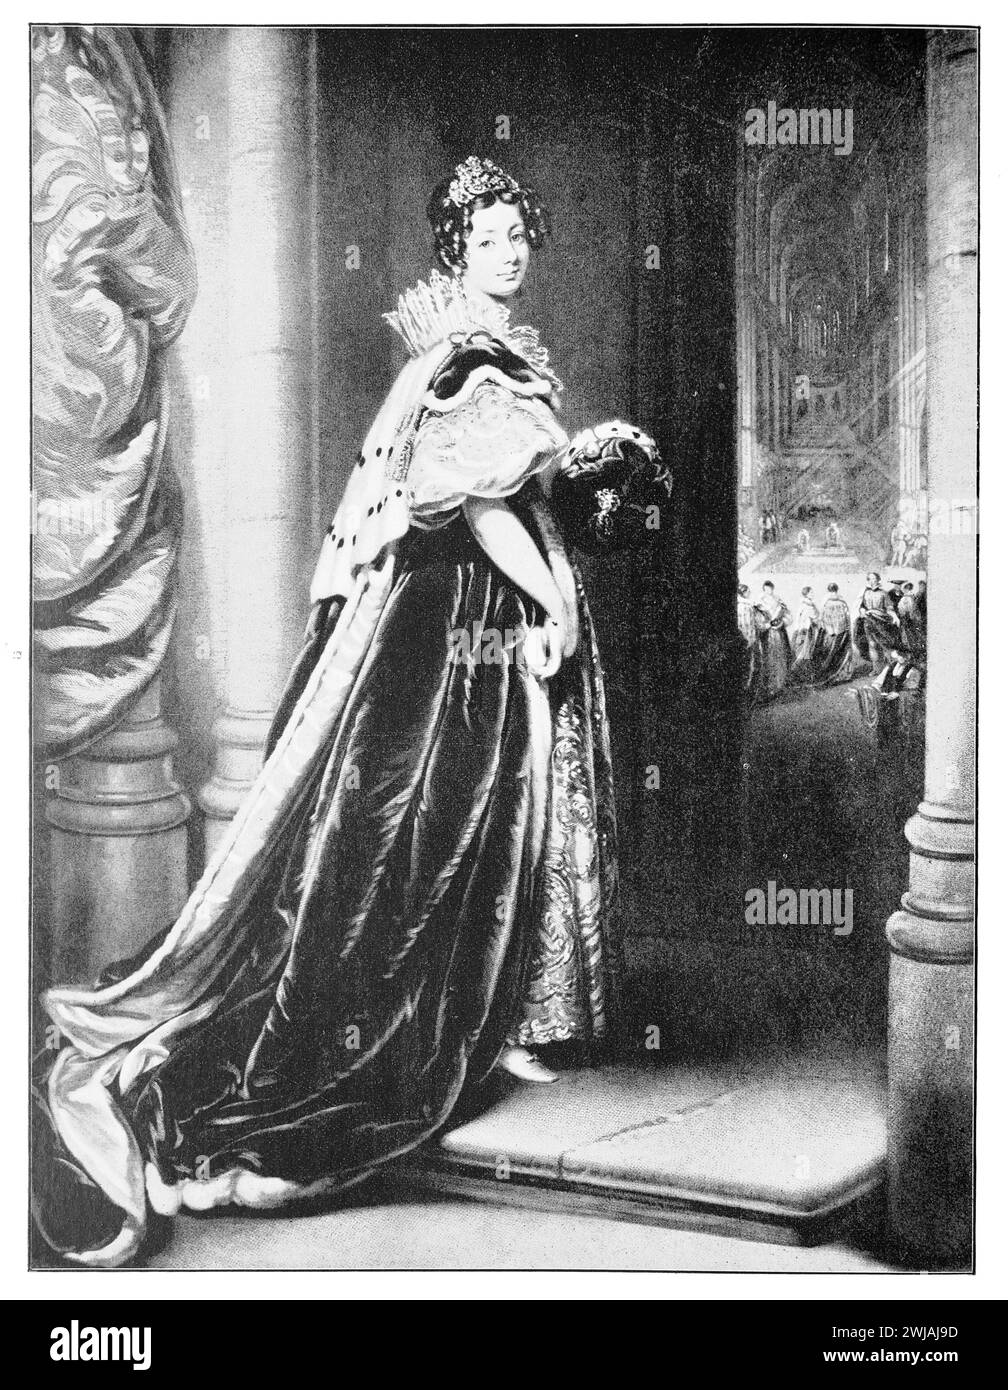 Portrait of Louisa Barbara Trefusis, Lady Rolle (c1795 - 1885), in the robes she wore at the coronation of King William IV of England. Black and White Illustration from the Connoisseur, an Illustrated Magazine for Collectors Voll 3 (May-Aug 1902) published in London. Stock Photo